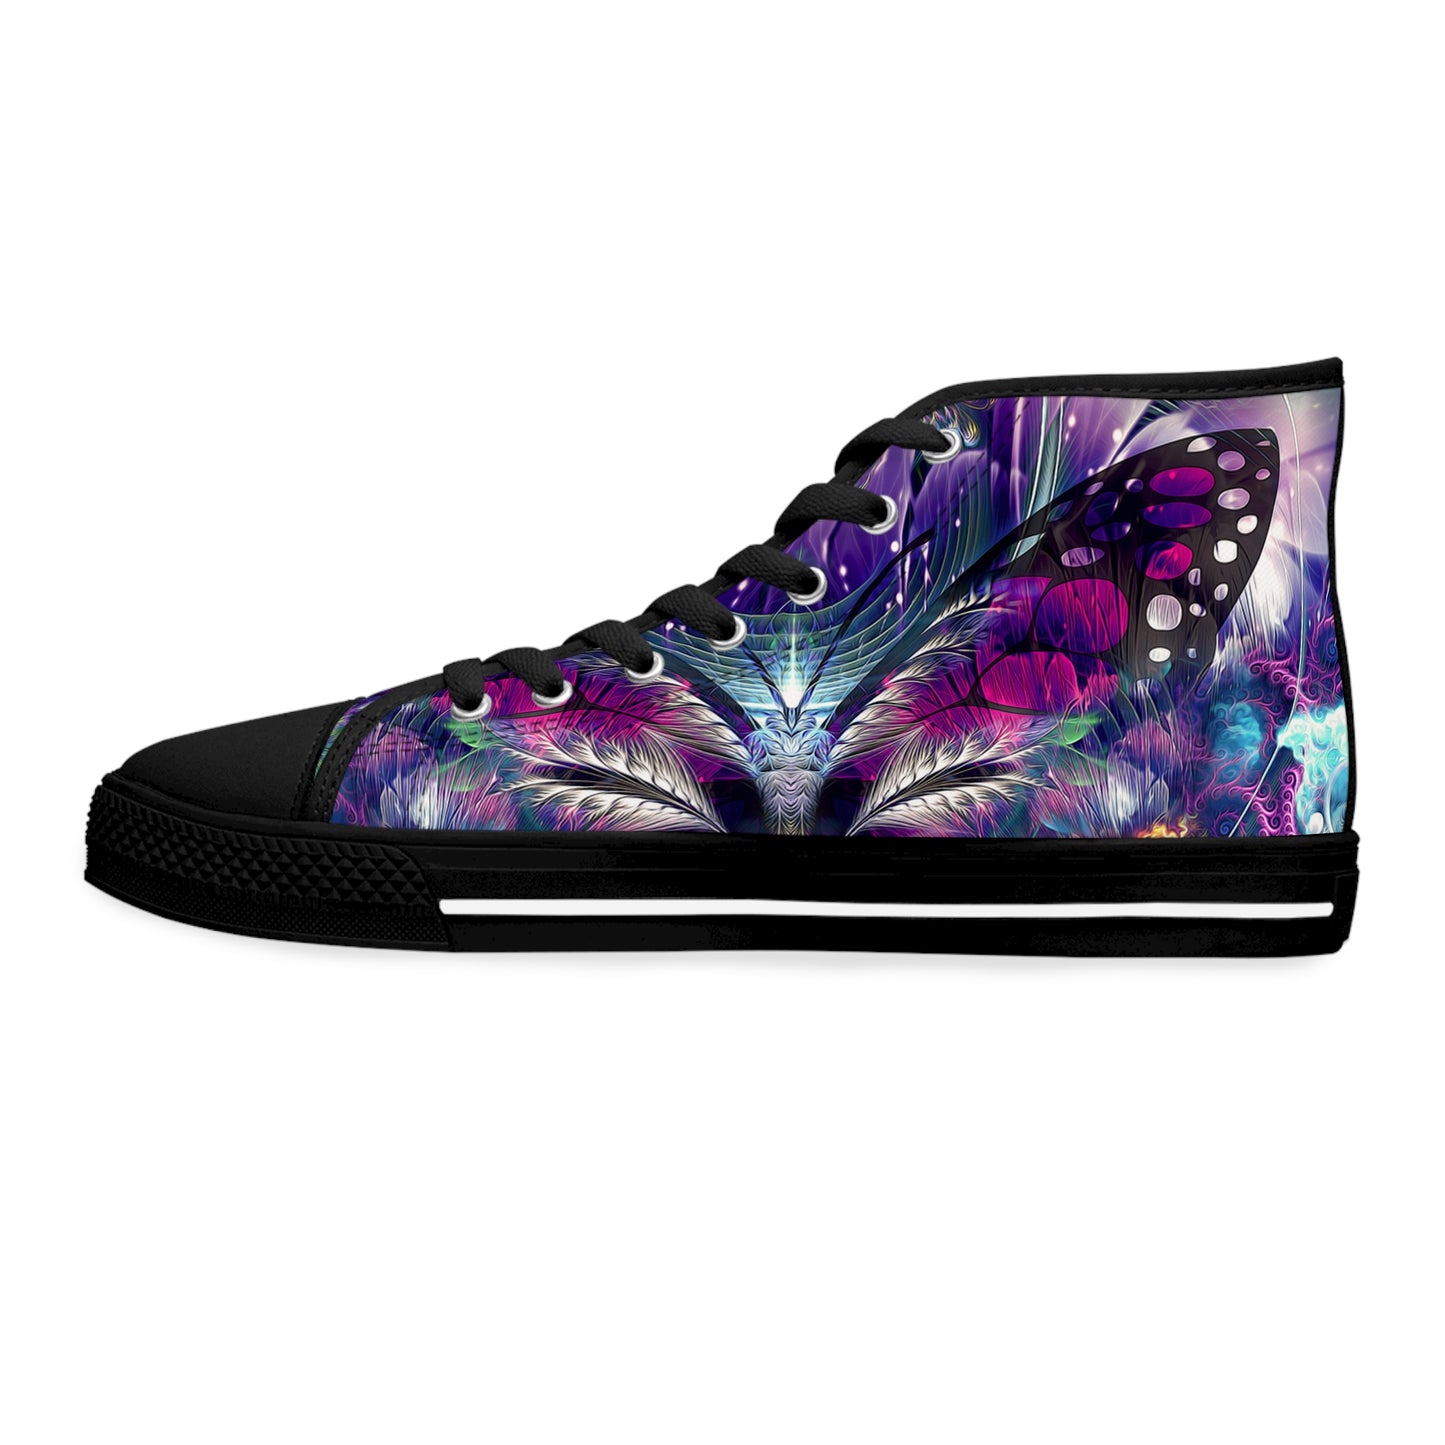 "Emergence V2" WOMEN'S HIGH TOP SNEAKERS